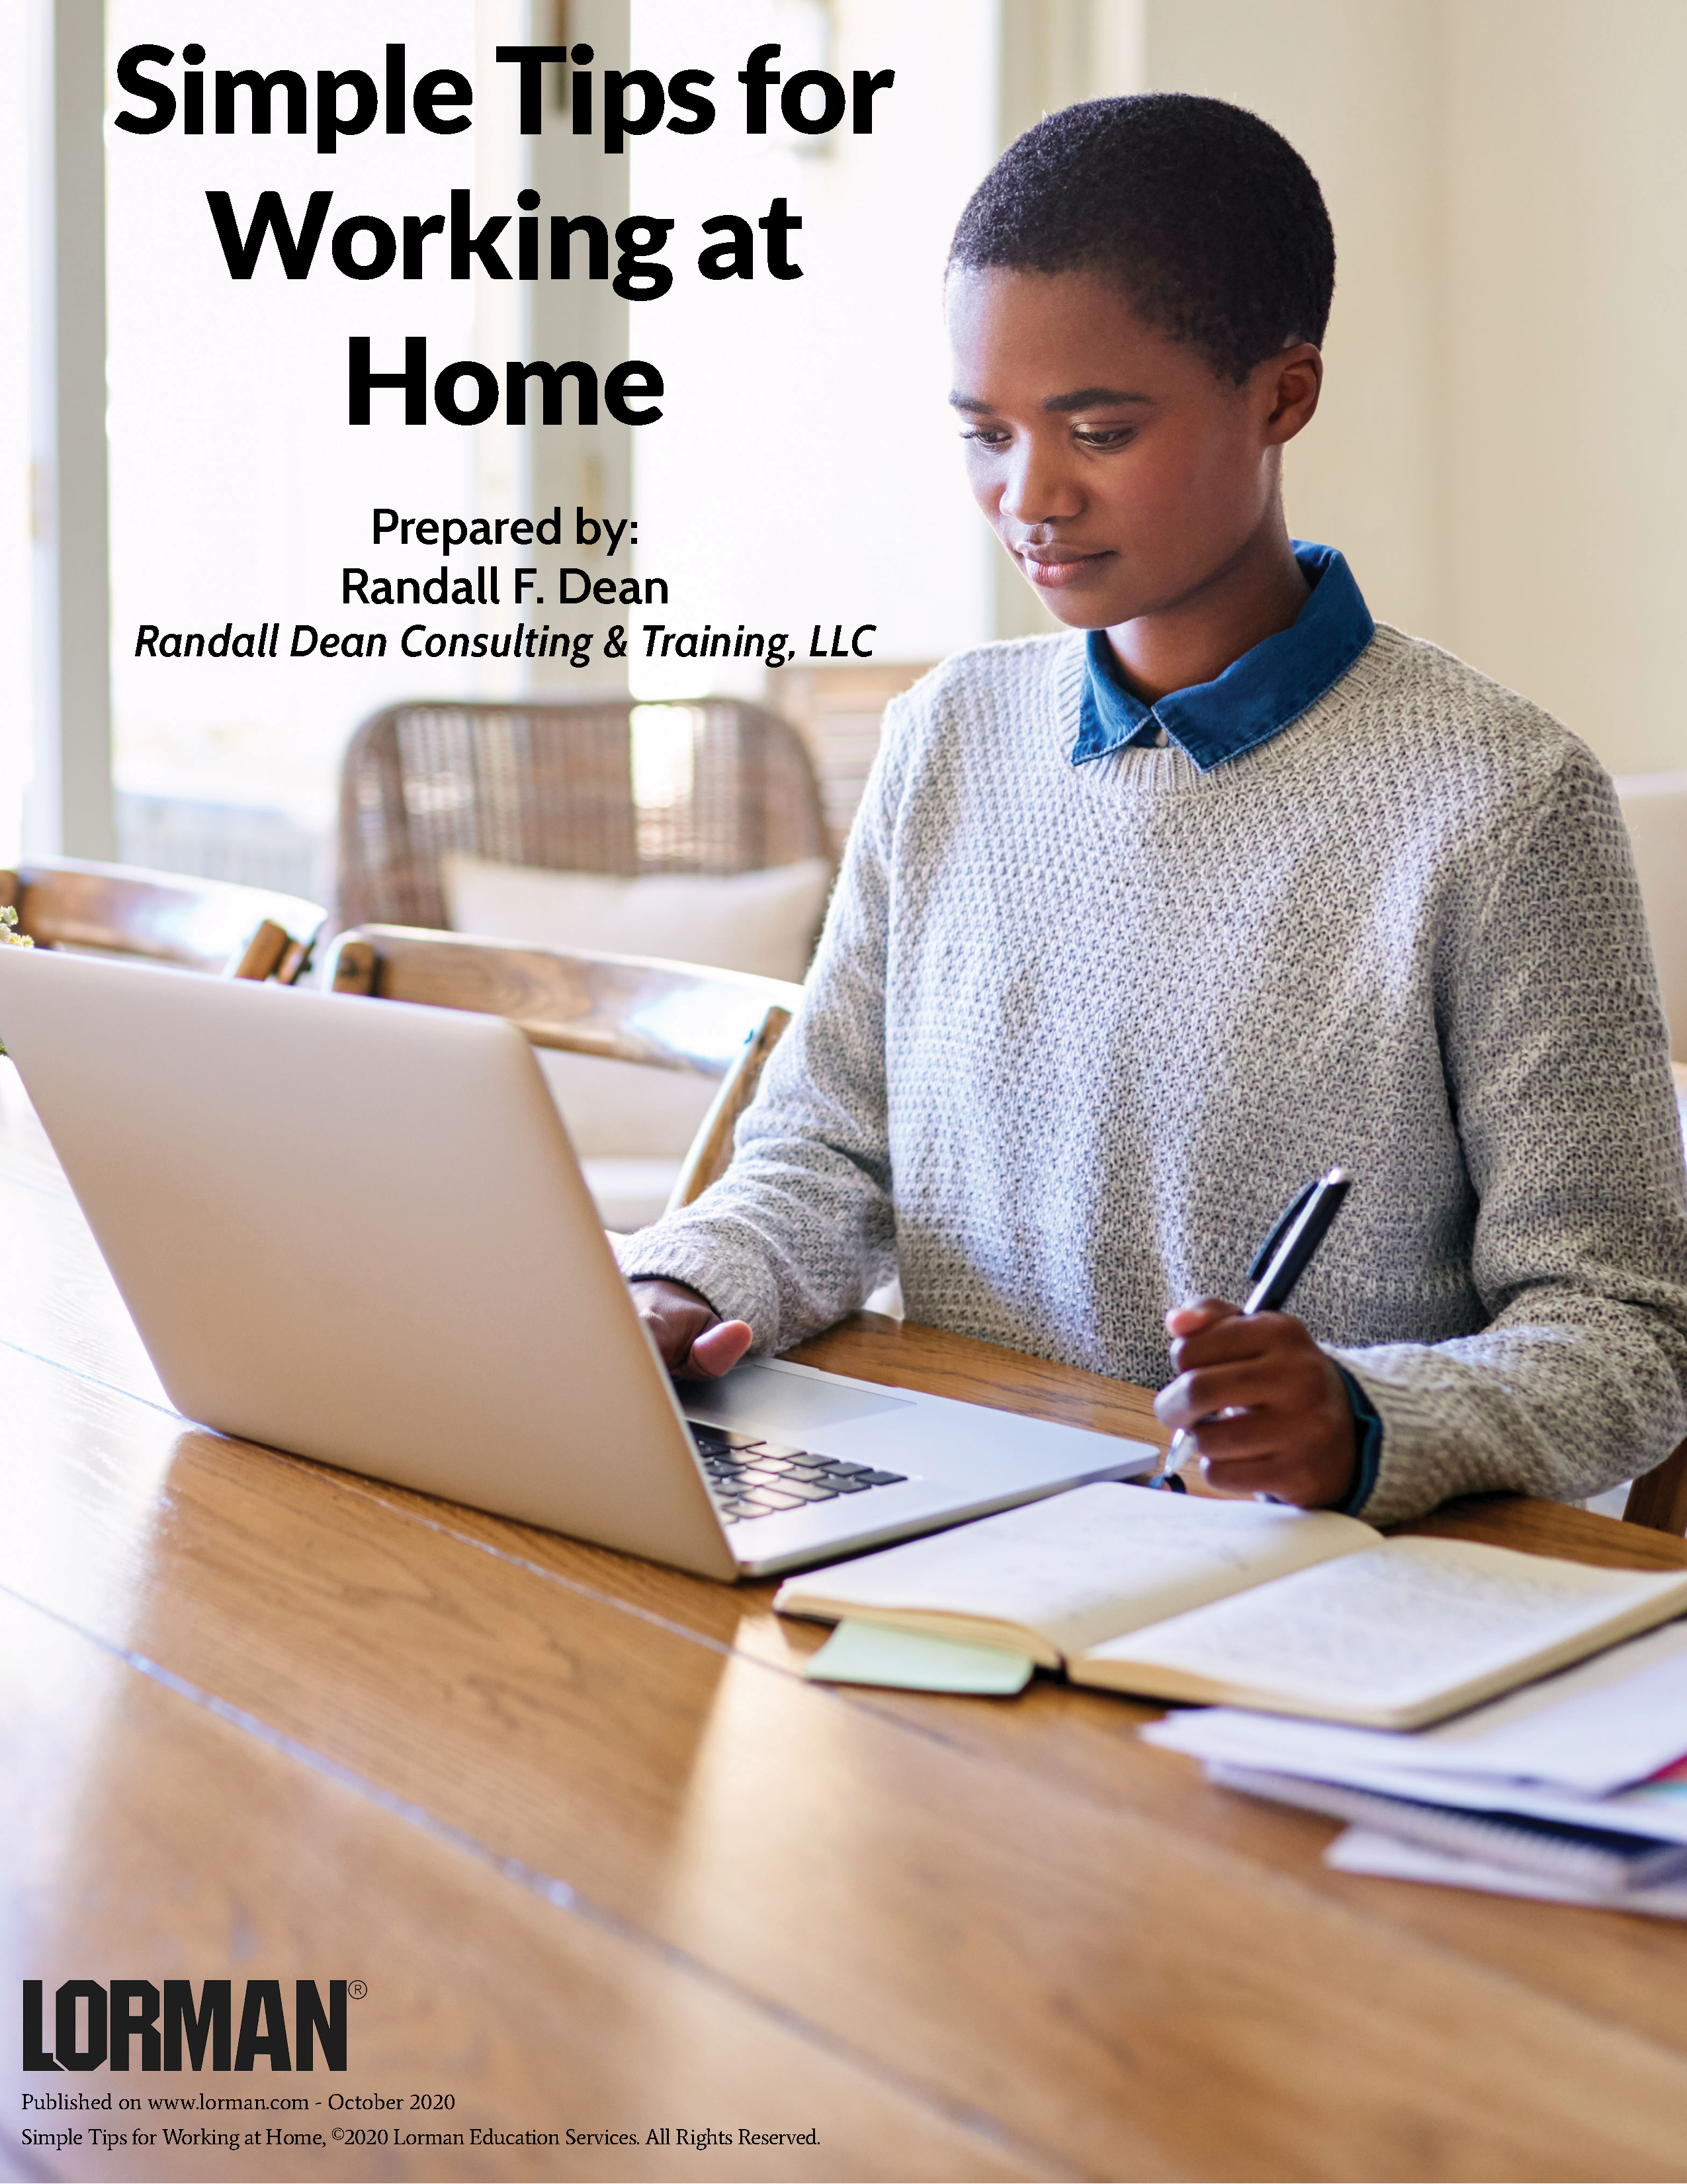 Simple Tips for Working at Home